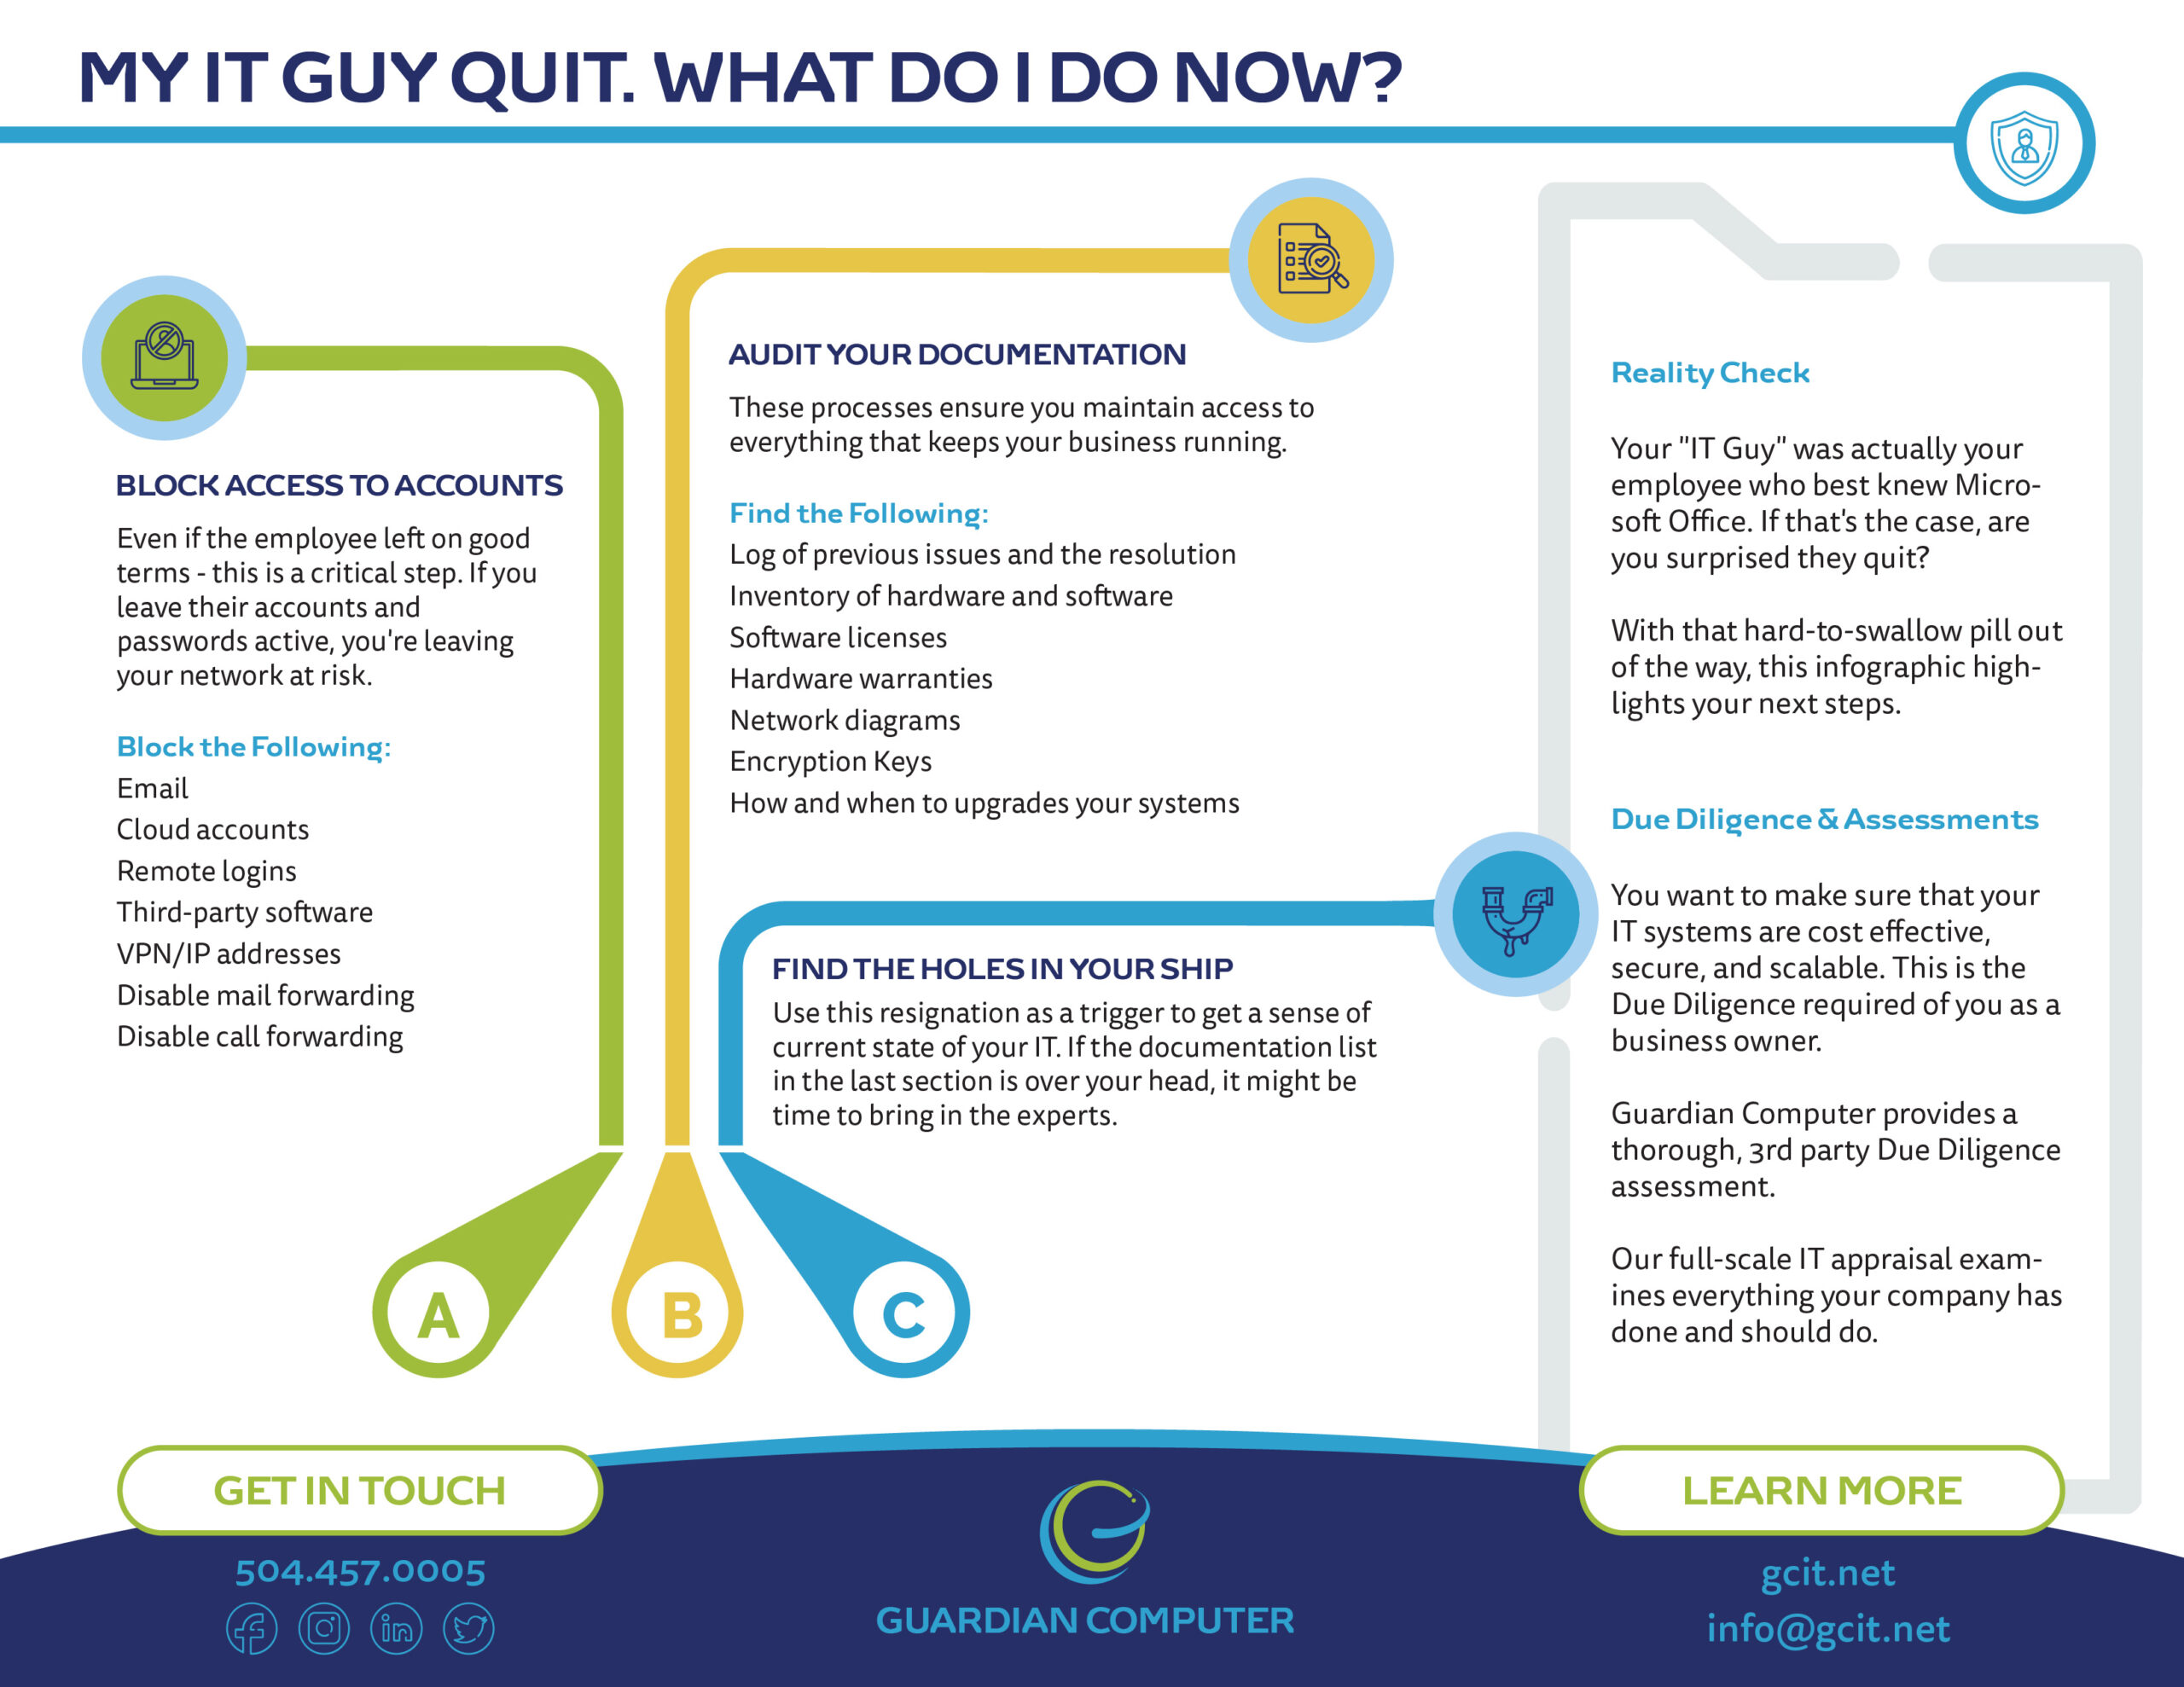 Infographic for "My IT Guy Quit. What Do I Do Now?"